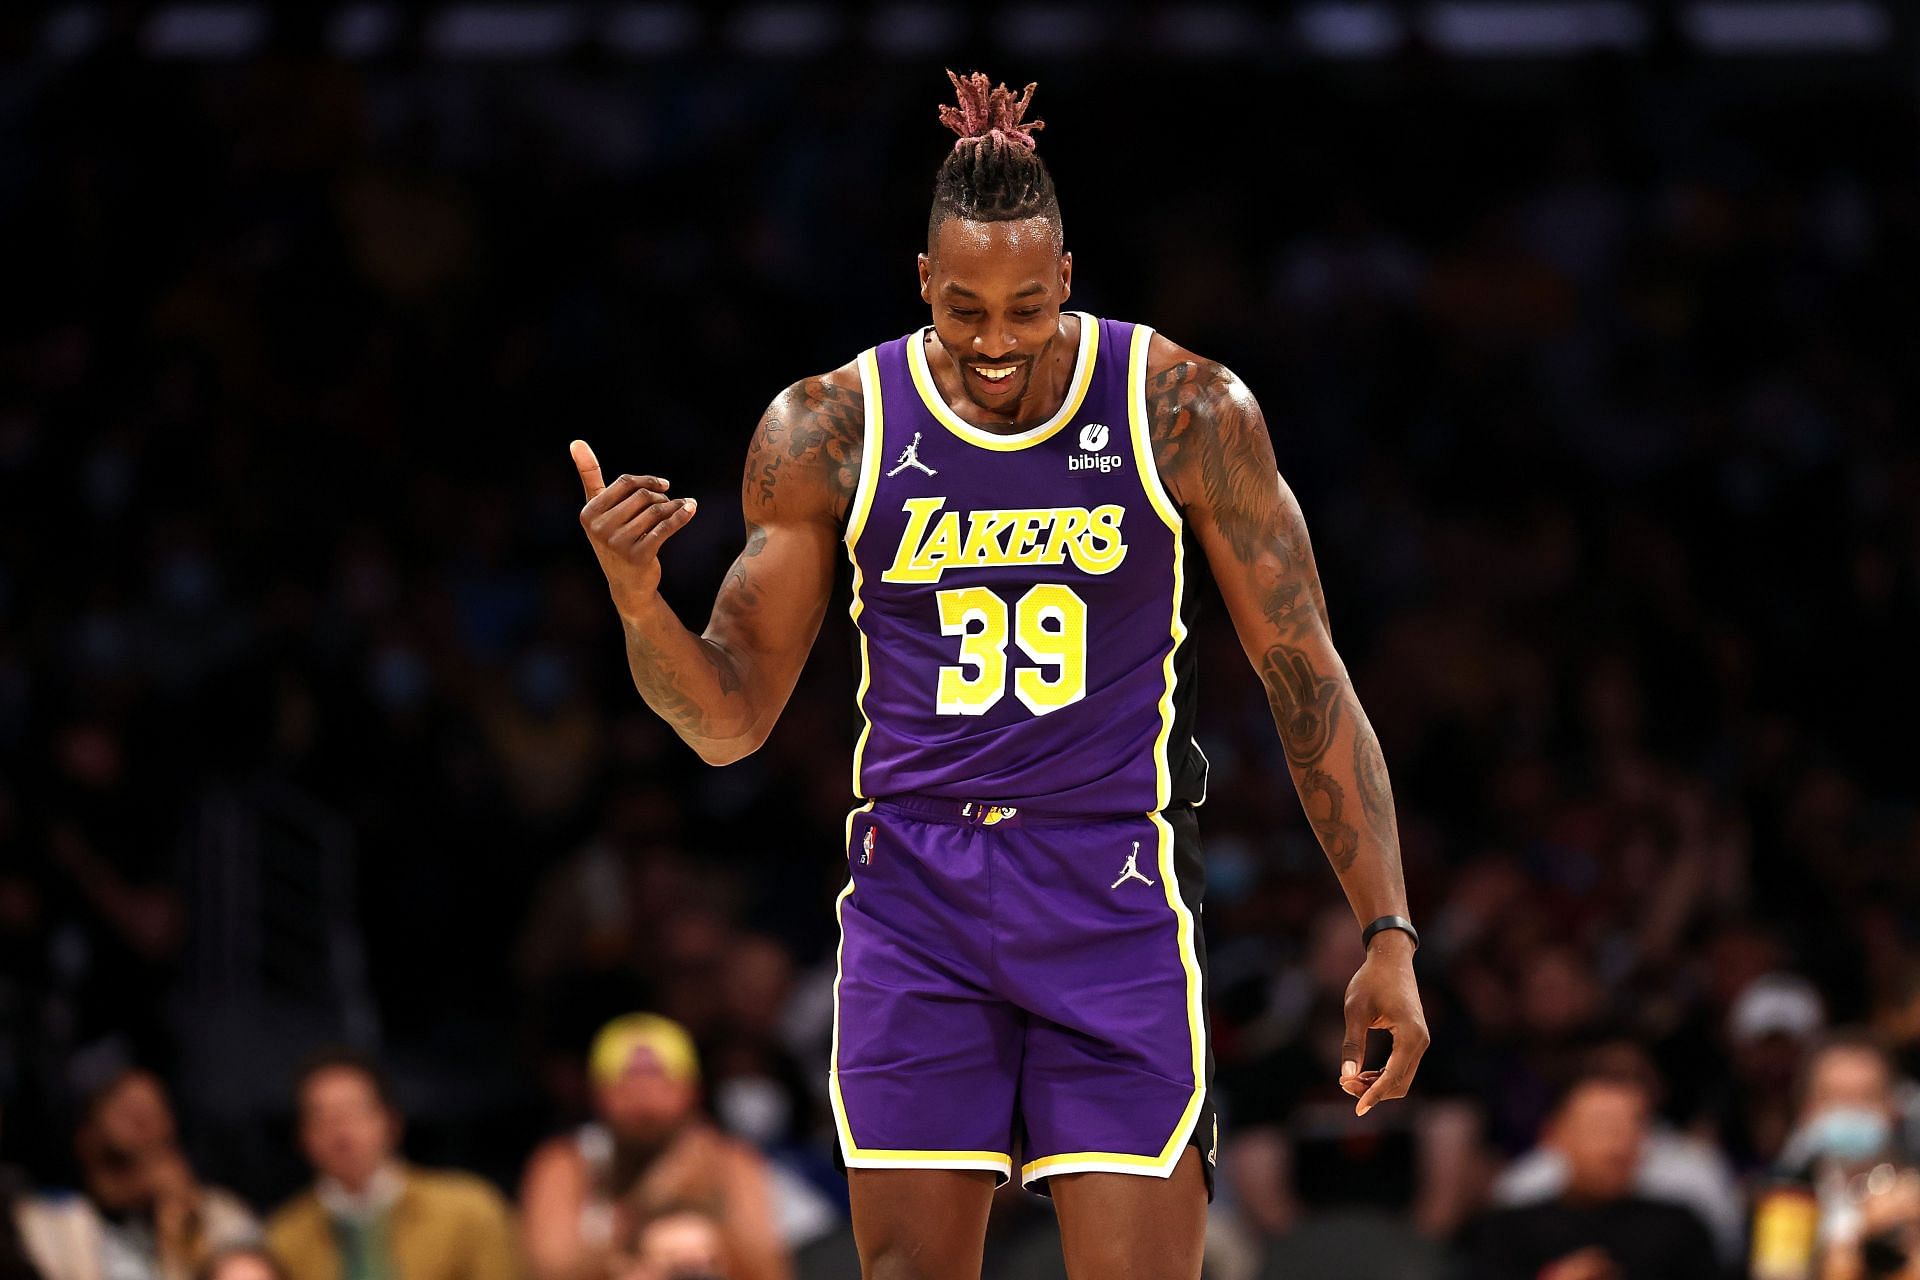 Dwight Howard brings energy to Lakers' bench, while trying to